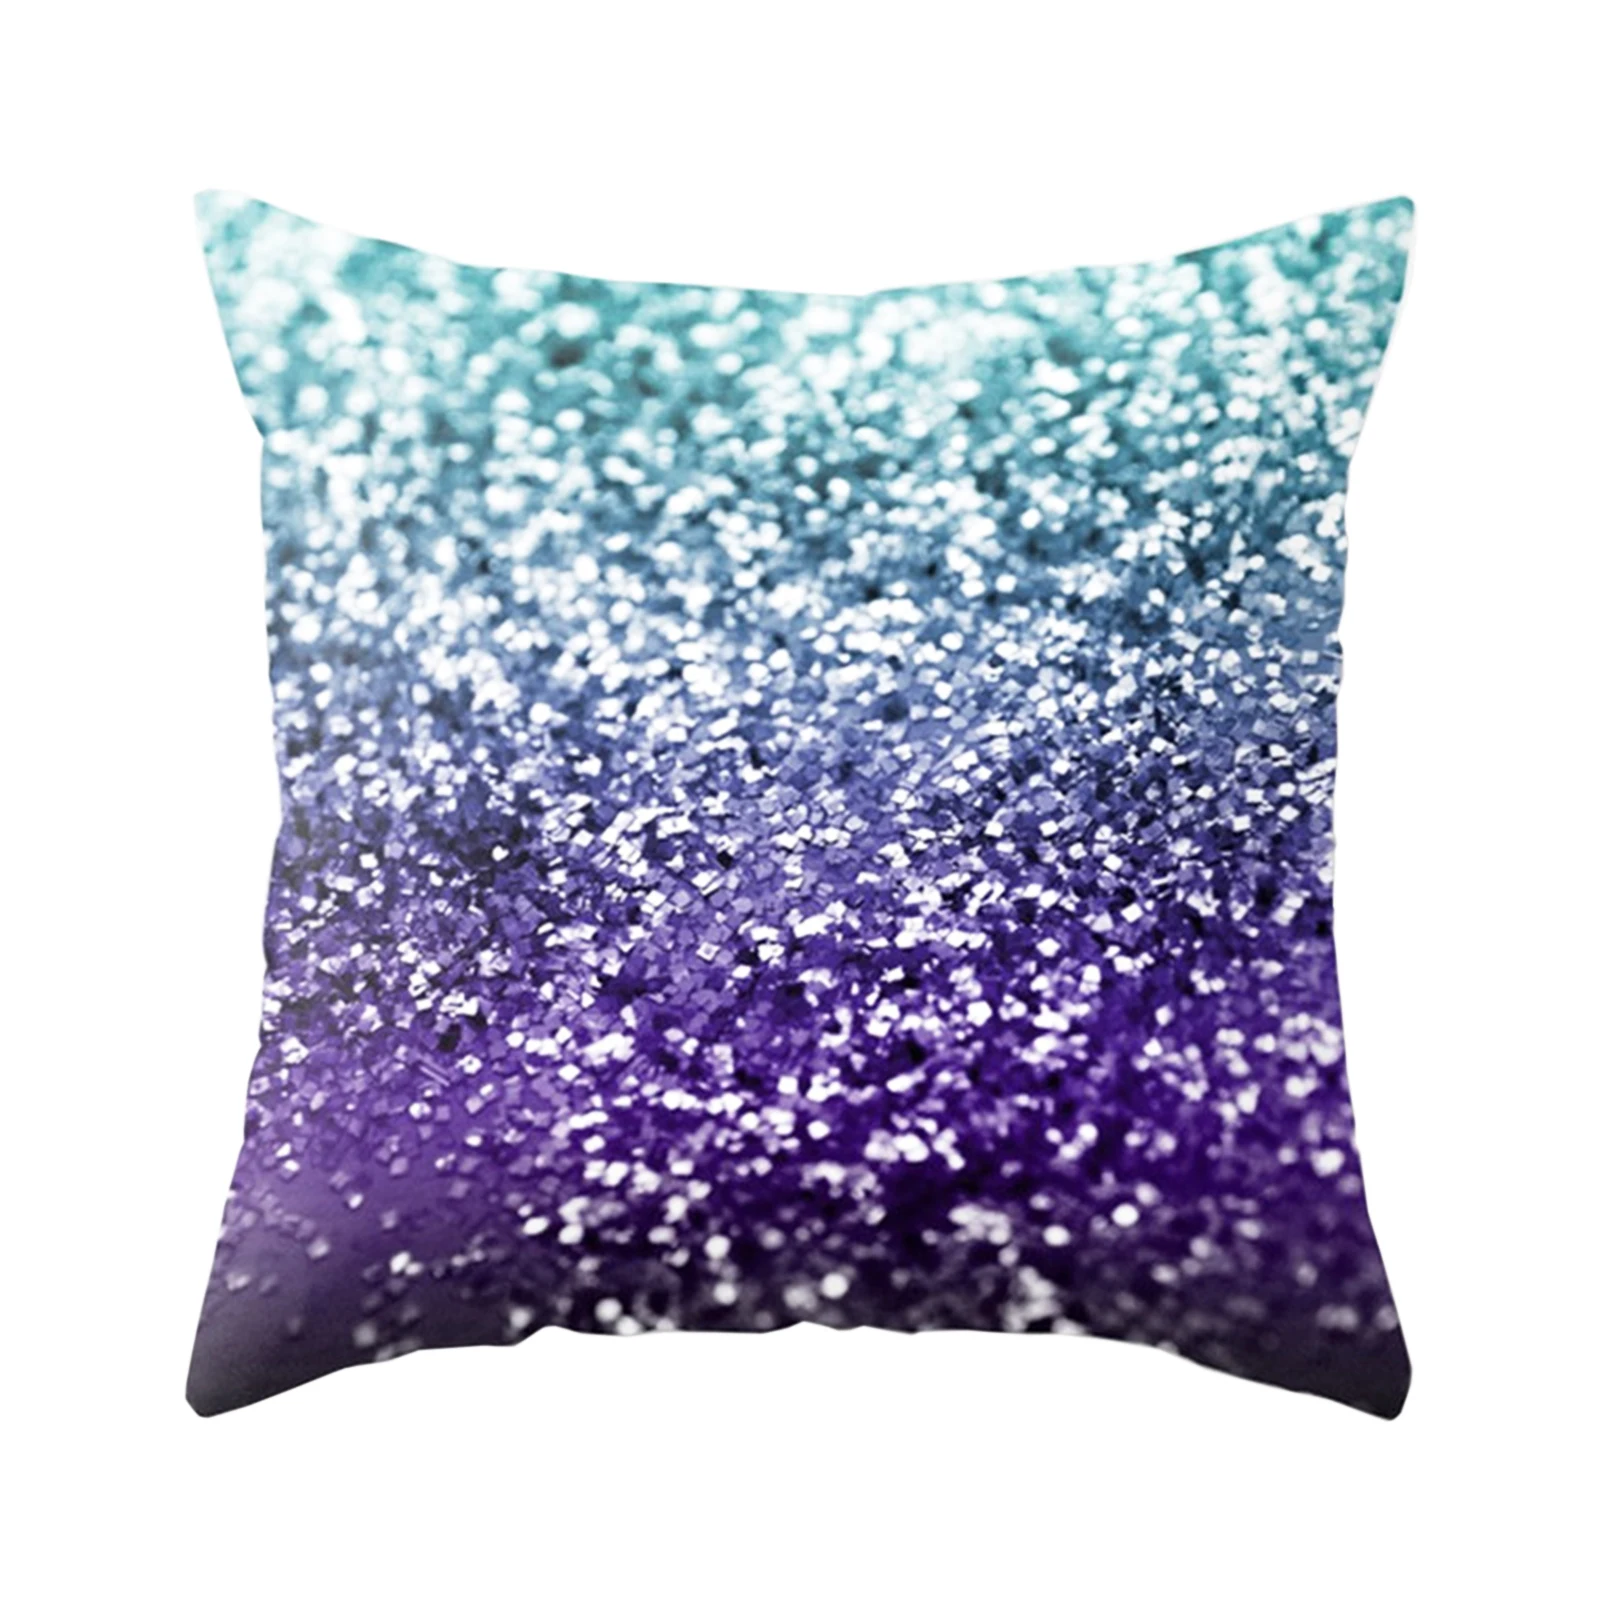 45 x 45cm Magical Square Mermaid Sequin Cushion Cover Colored Throw Pillowcase For Wedding Party Hotel Home Sofa Bed Decor | Дом и сад